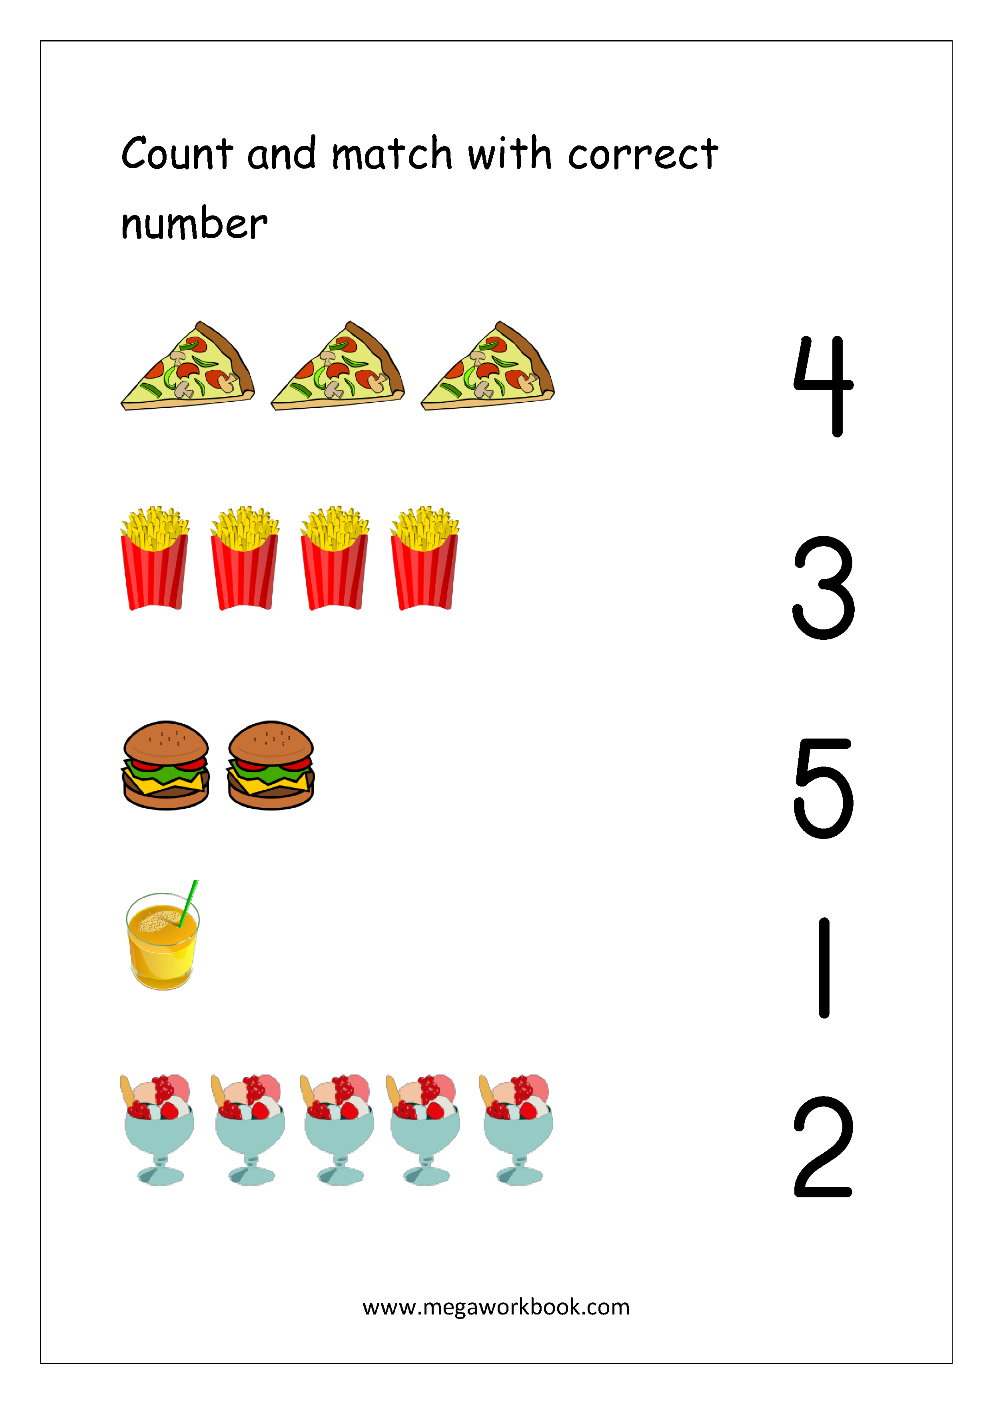 free-printable-number-matching-worksheets-for-kindergarten-and-preschool-count-and-match-1-10